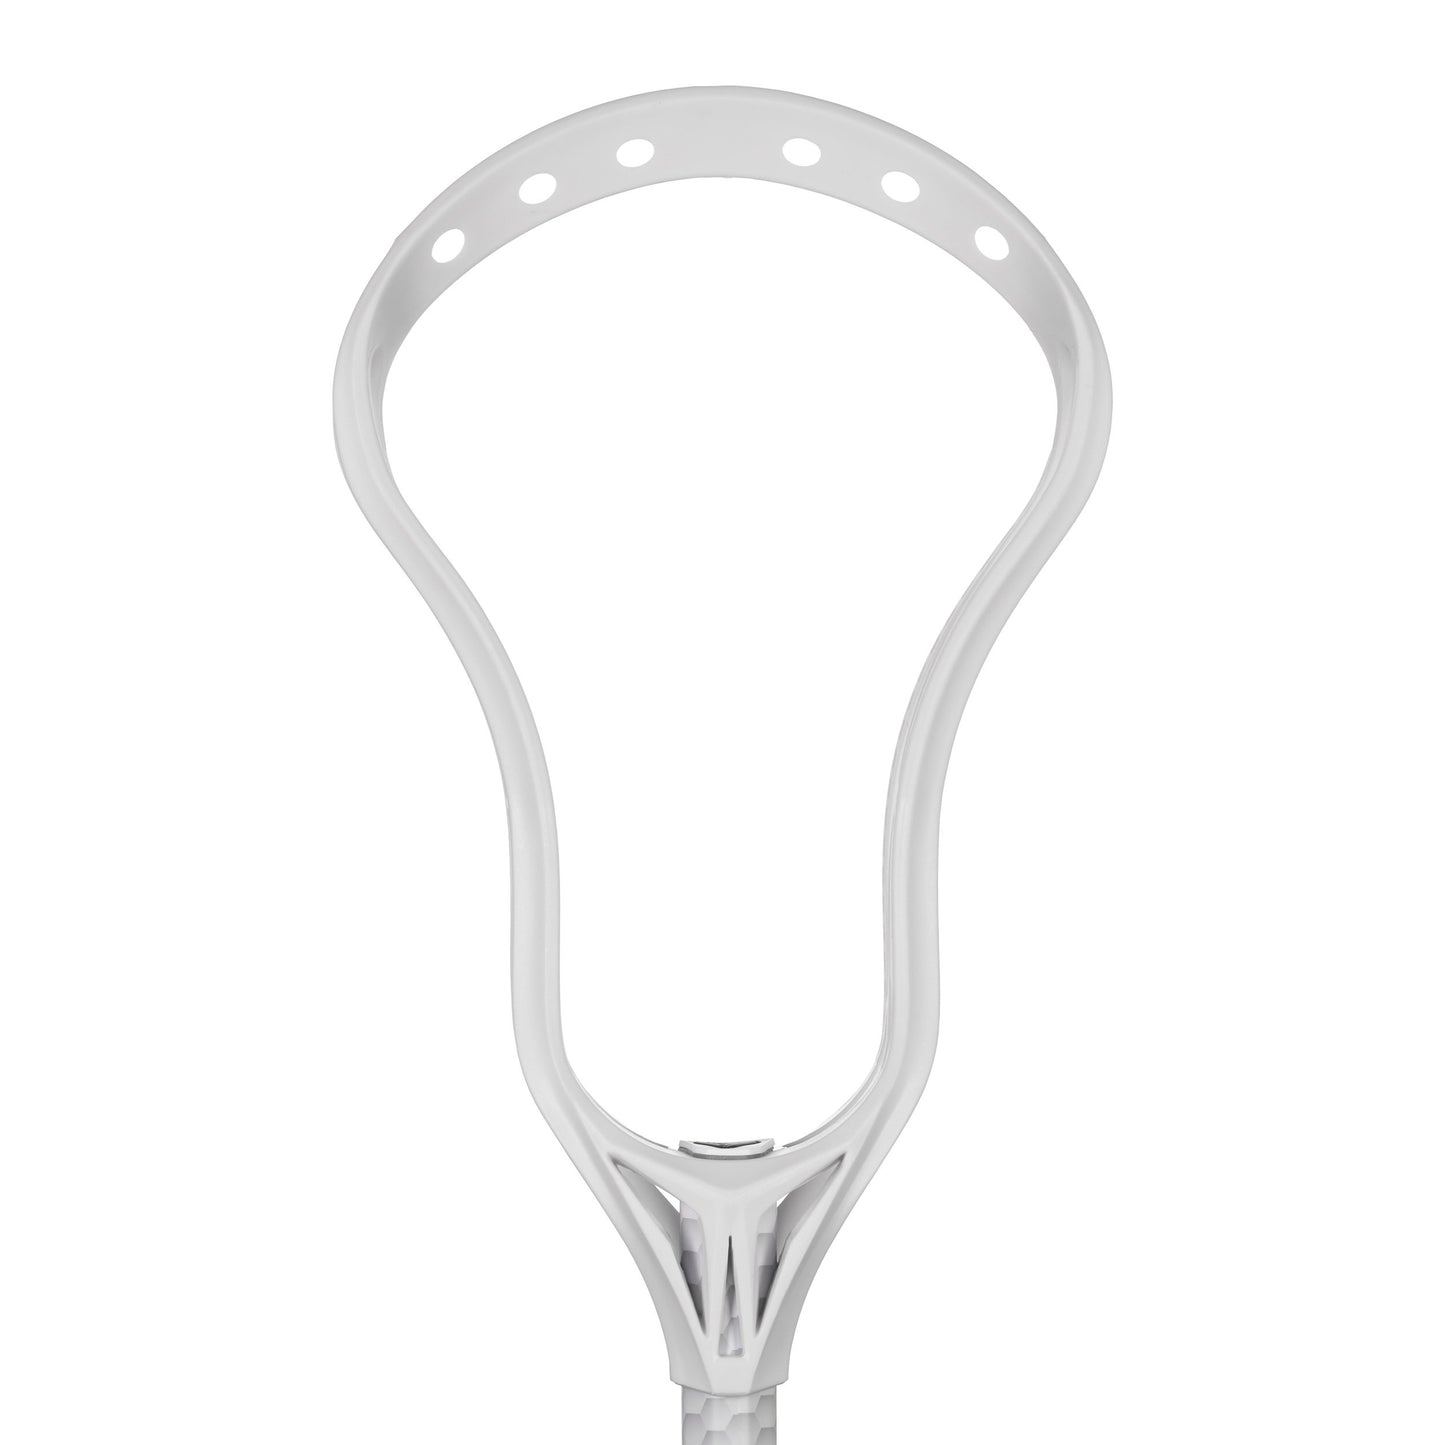 NEW! Crankshooter® Eagle™ Unstrung Head - FREE SHIPPING